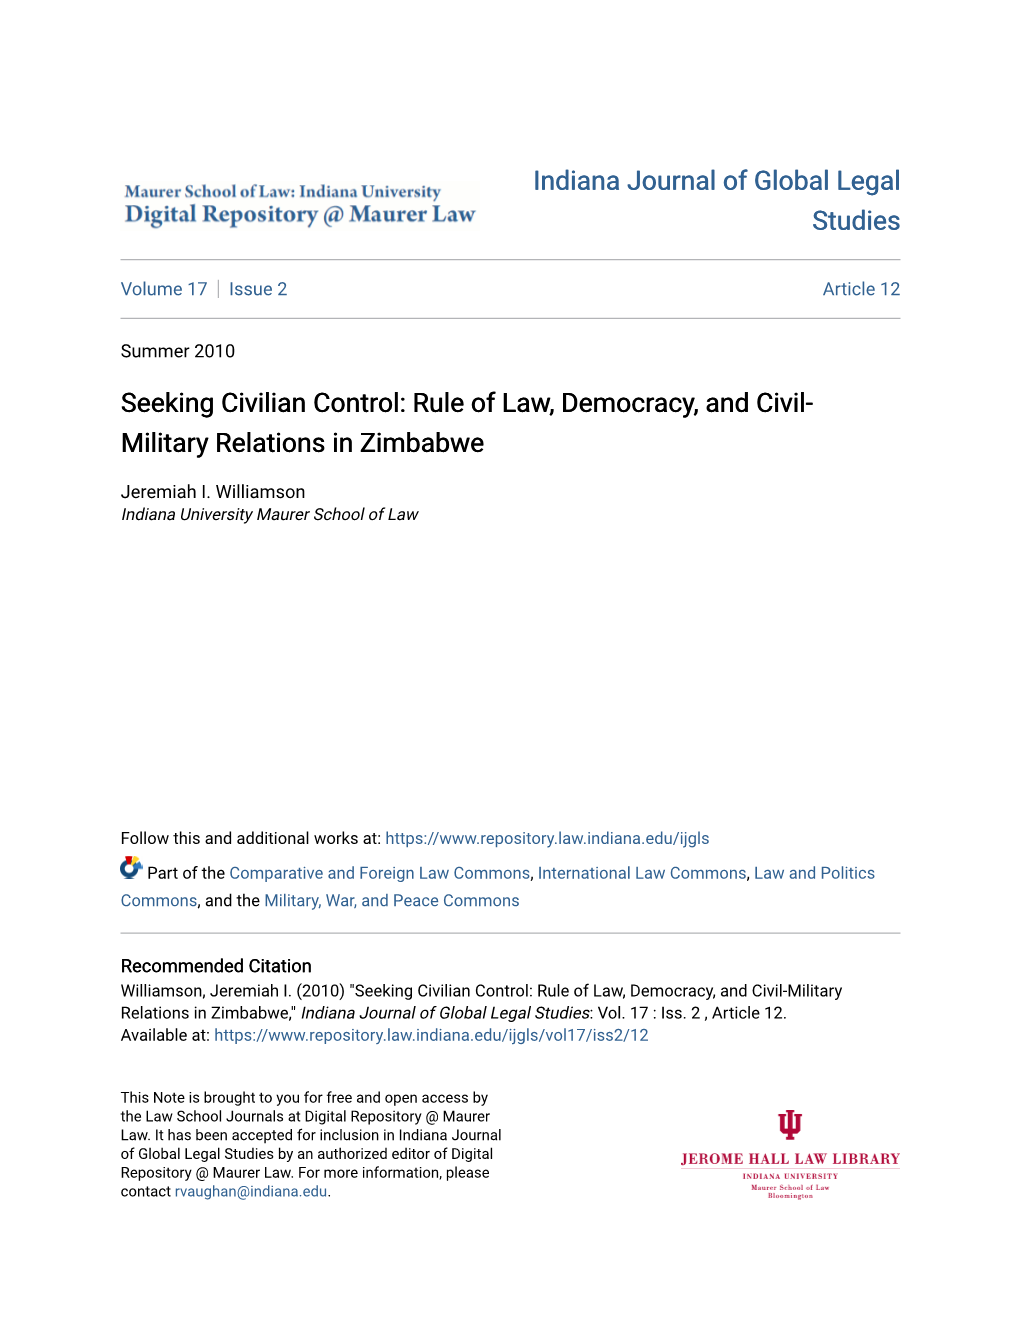 Rule of Law, Democracy, and Civil-Military Relations in Zimbabwe," Indiana Journal of Global Legal Studies: Vol